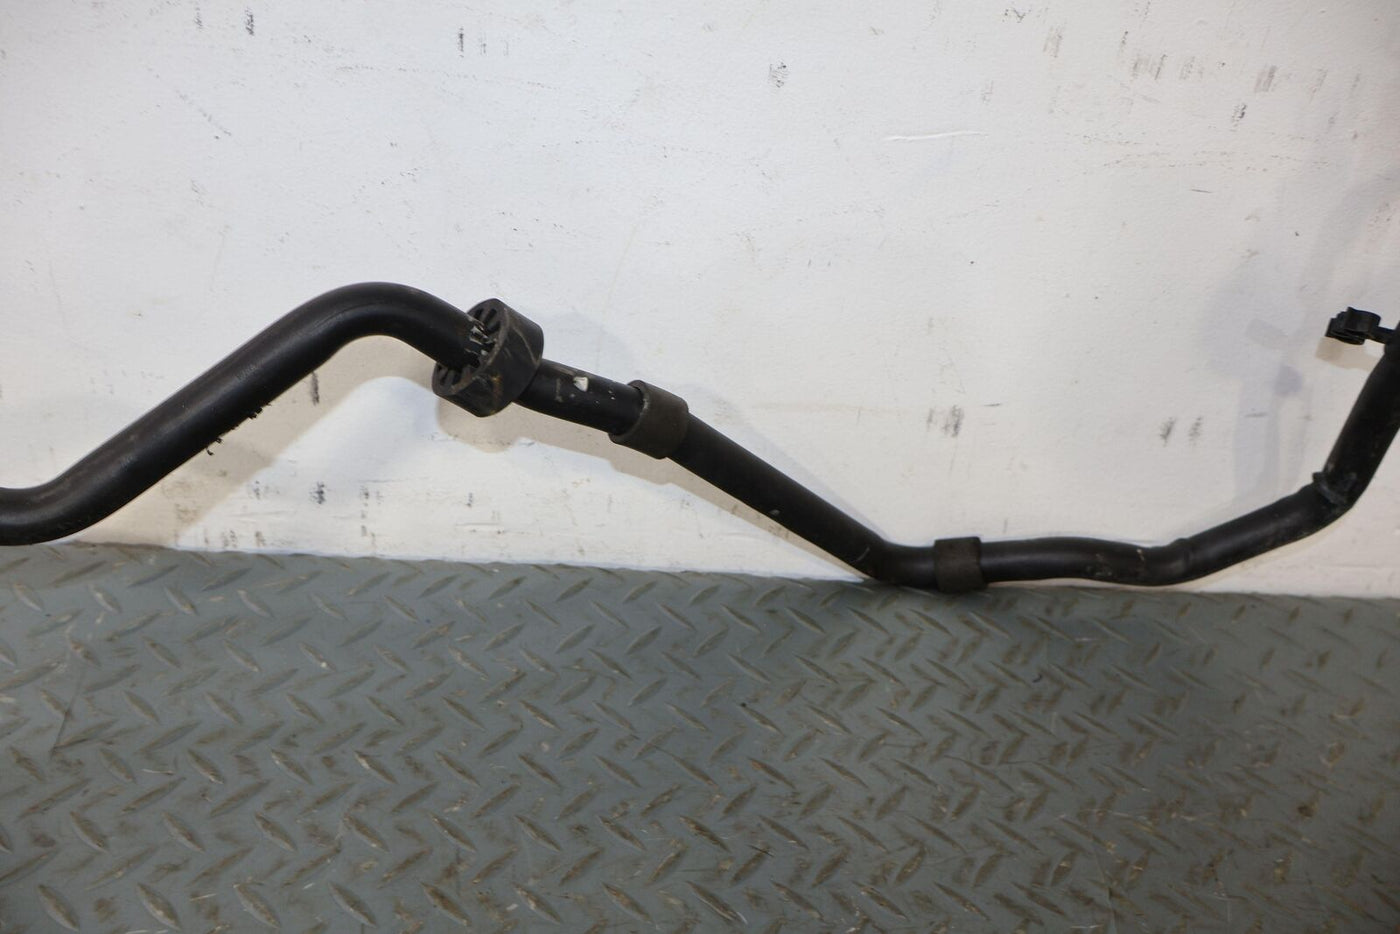 03-10 Bentley Continental GT Complete AC Air Conditioning Hose Set (78K Miles)